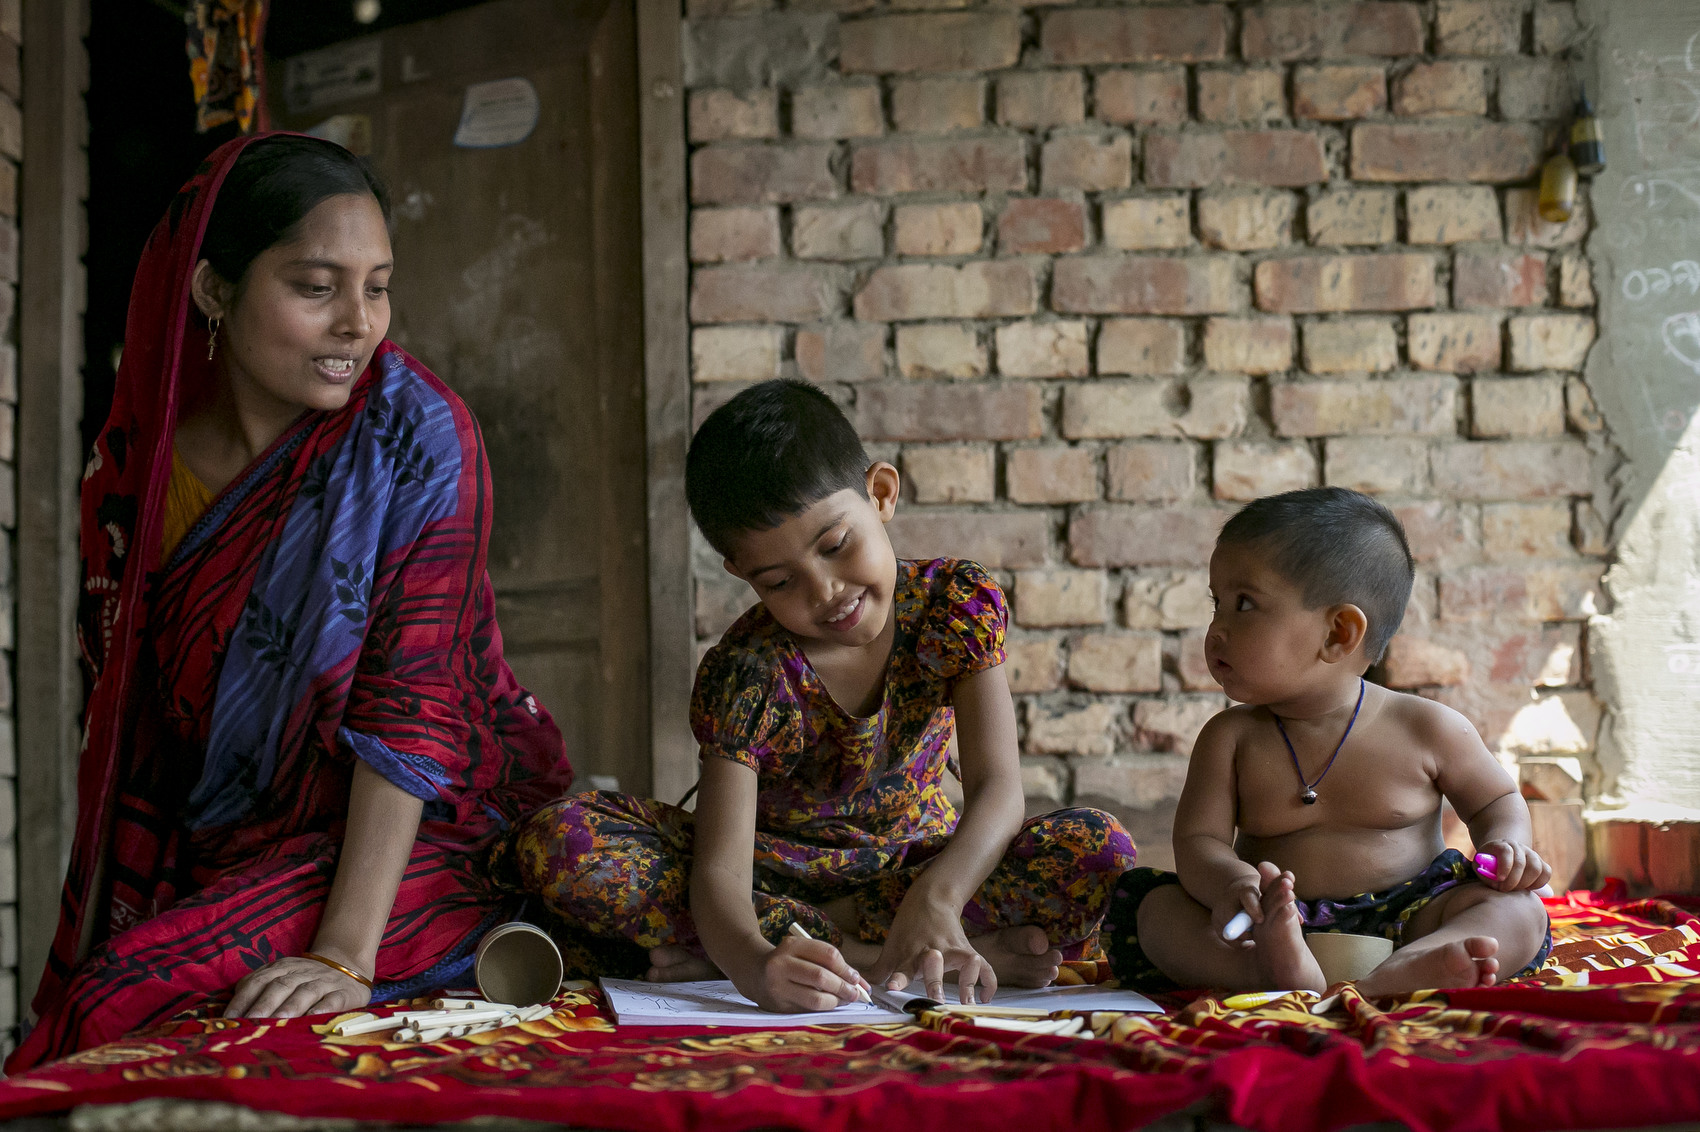 Mosamad Muslima Khatum plays with her baby sister while her mother XXX looks on at her home in Govindapur, Satkhira March 4, 2017 in Khulna division, Bangladesh. © Sightsavers/Allison Joyce 